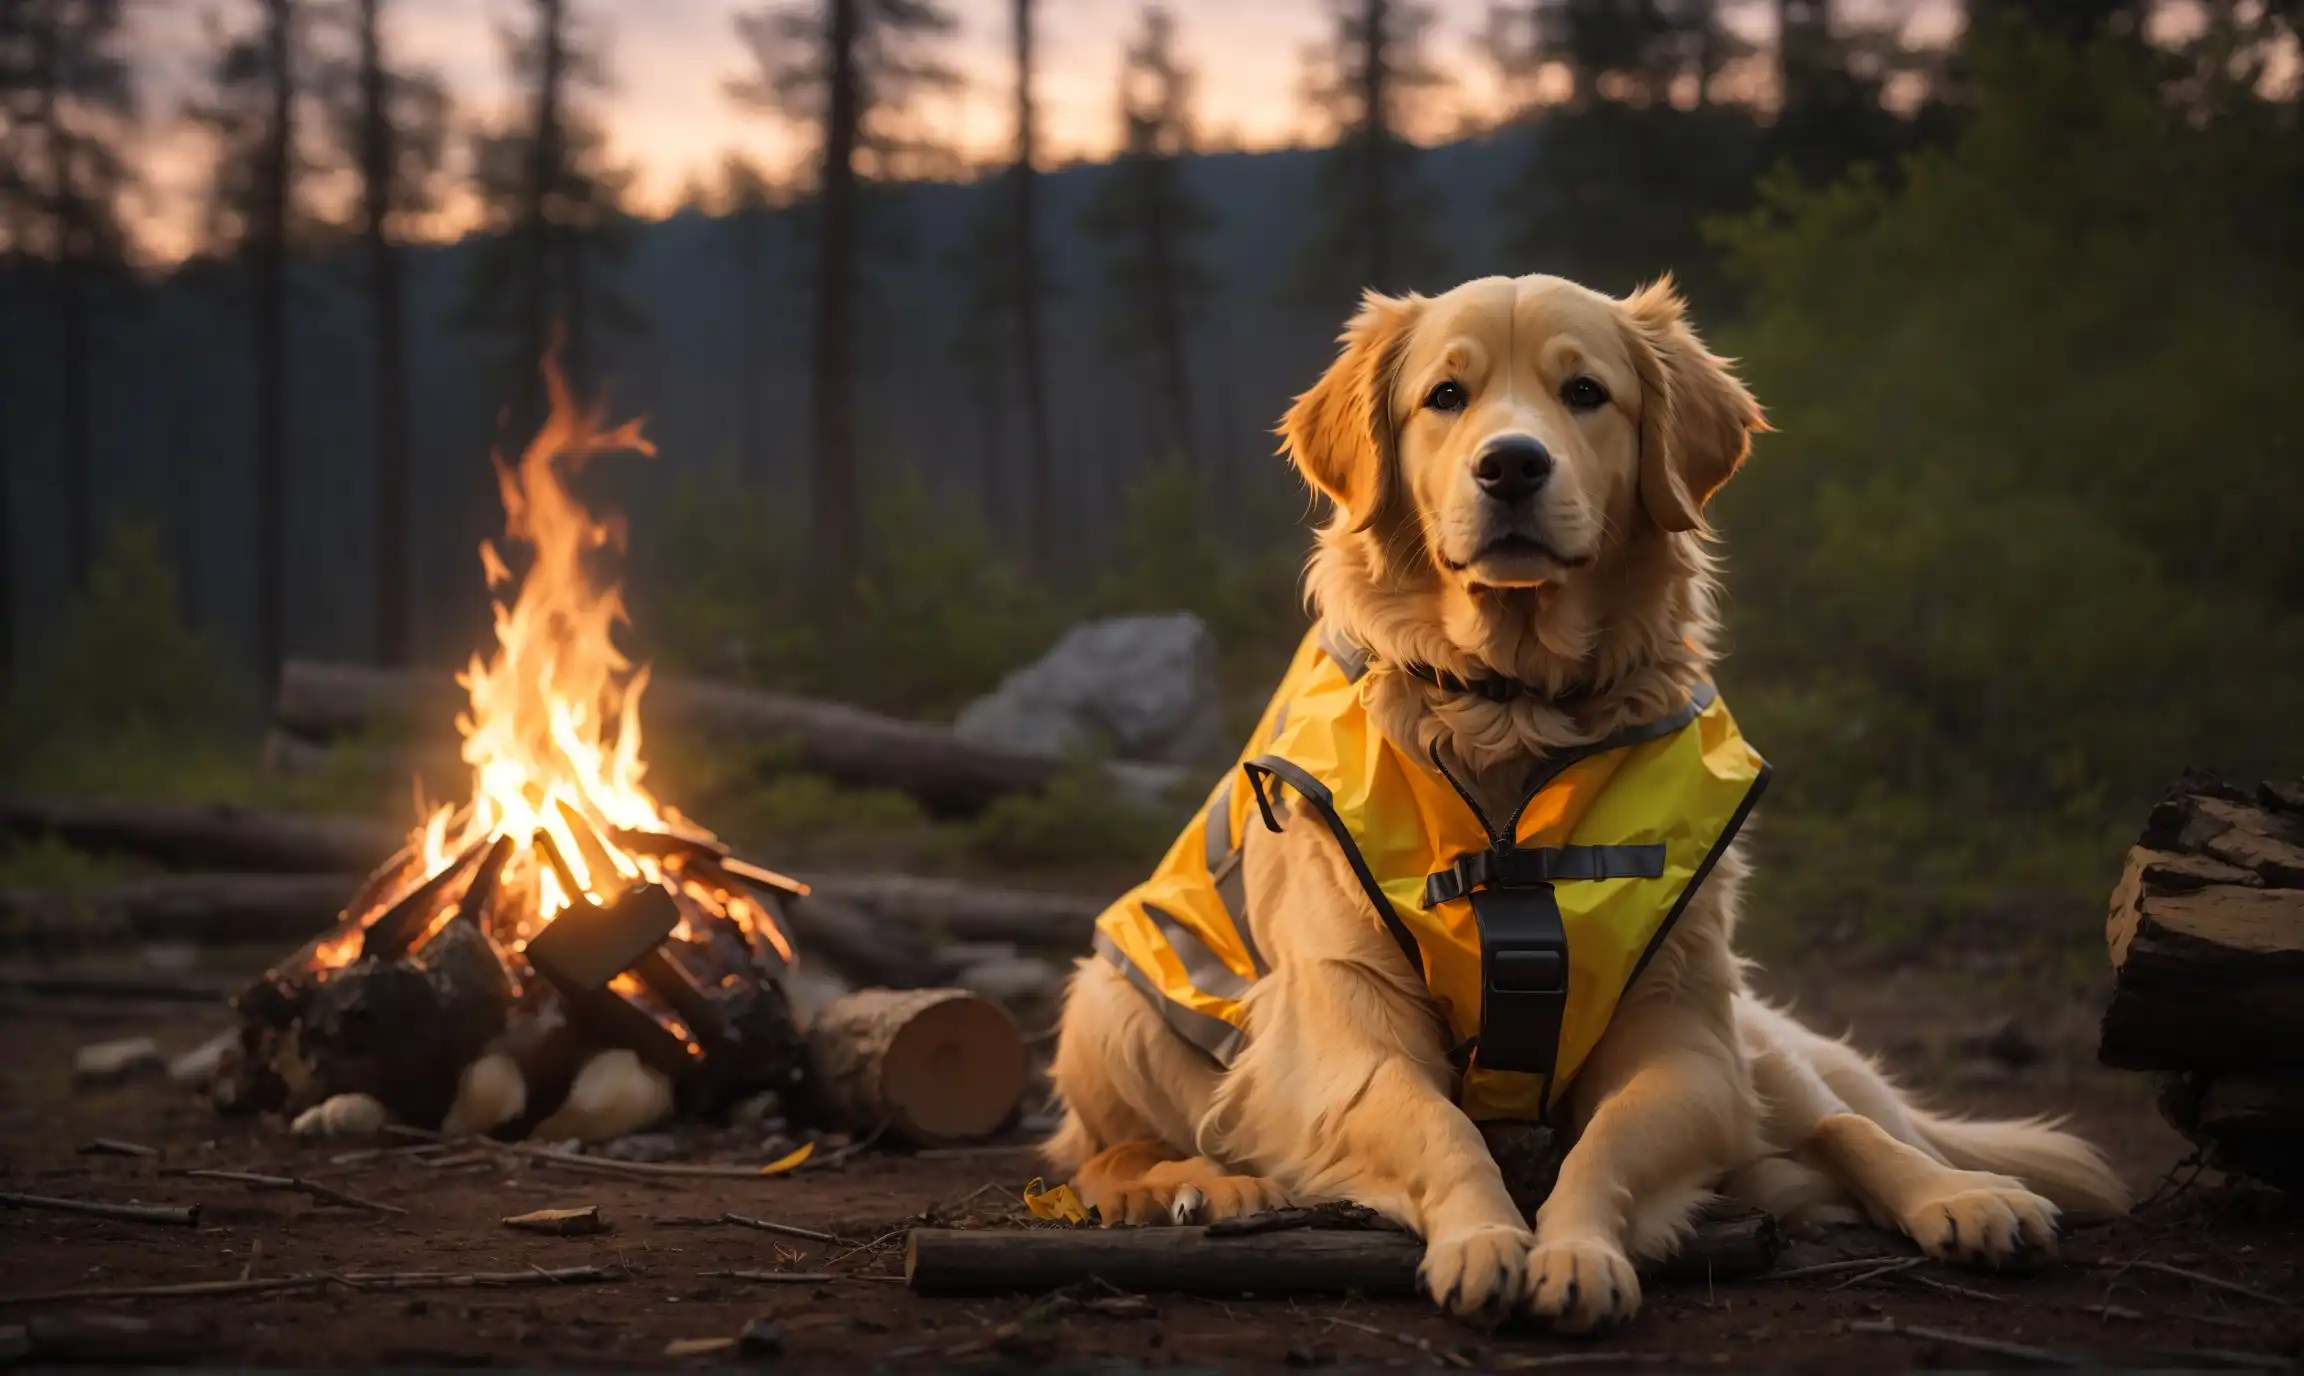 A Golden Retriever sitting obediently next to a campfire, wearing a safety reflective vest, surrounded by forest under a twilight sky